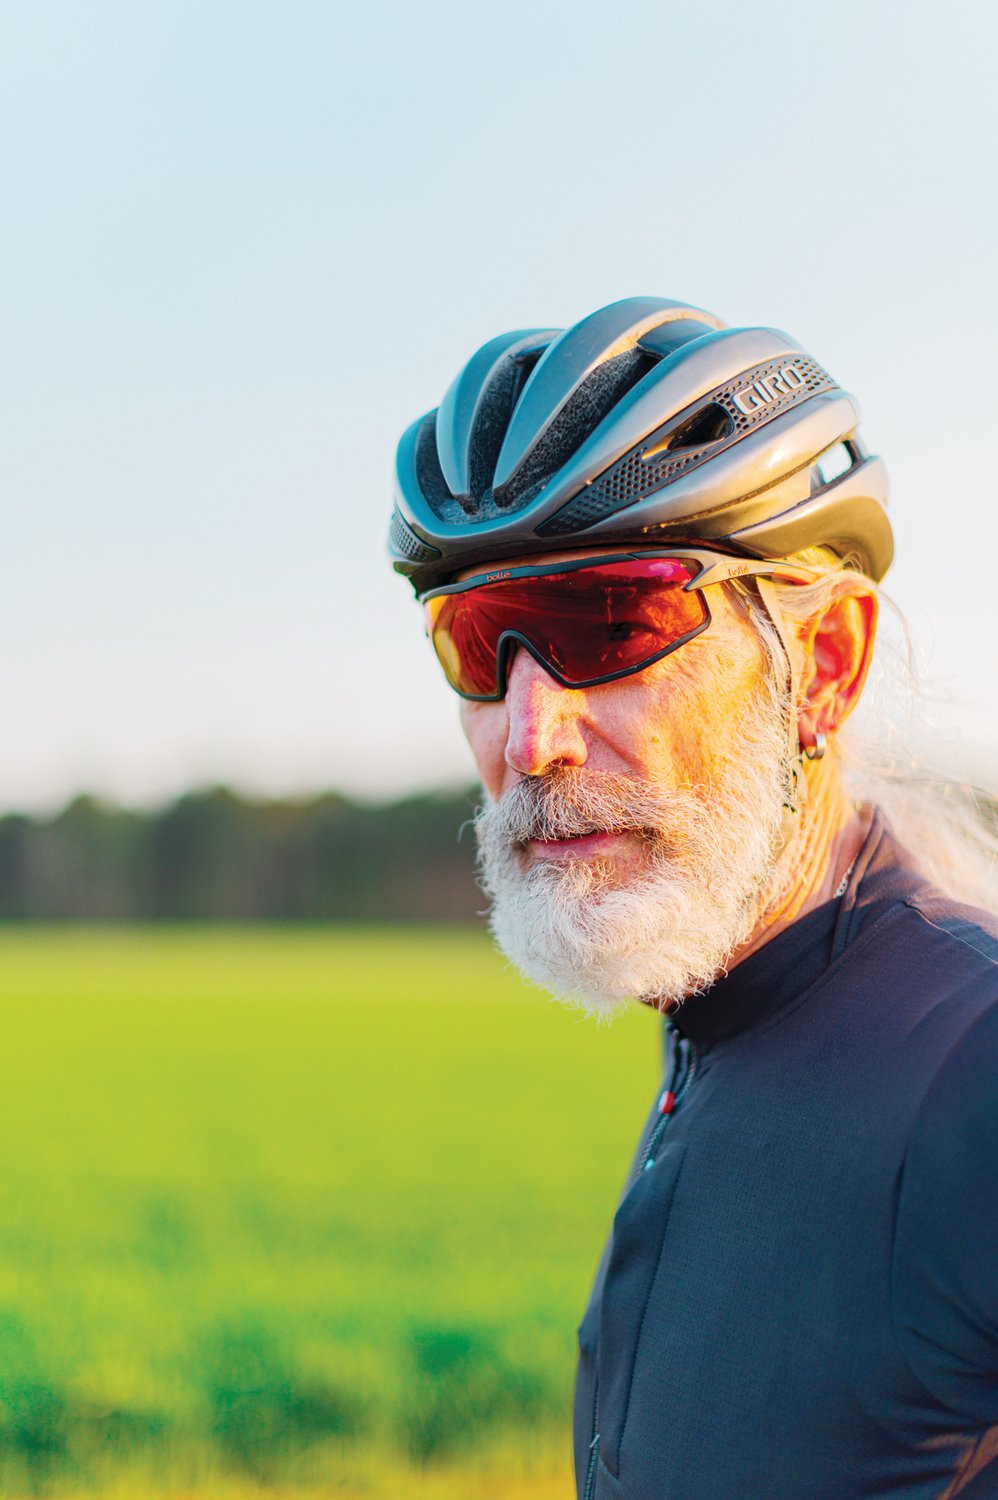 Chuck Gillis, a Pittsboro local and cycling expert, sports his amber red cycling glasses.paired with a form-fitting Giro helmet. Chuck is a huge advocate of riding safely whether that’s signaling or wearing proper gear.